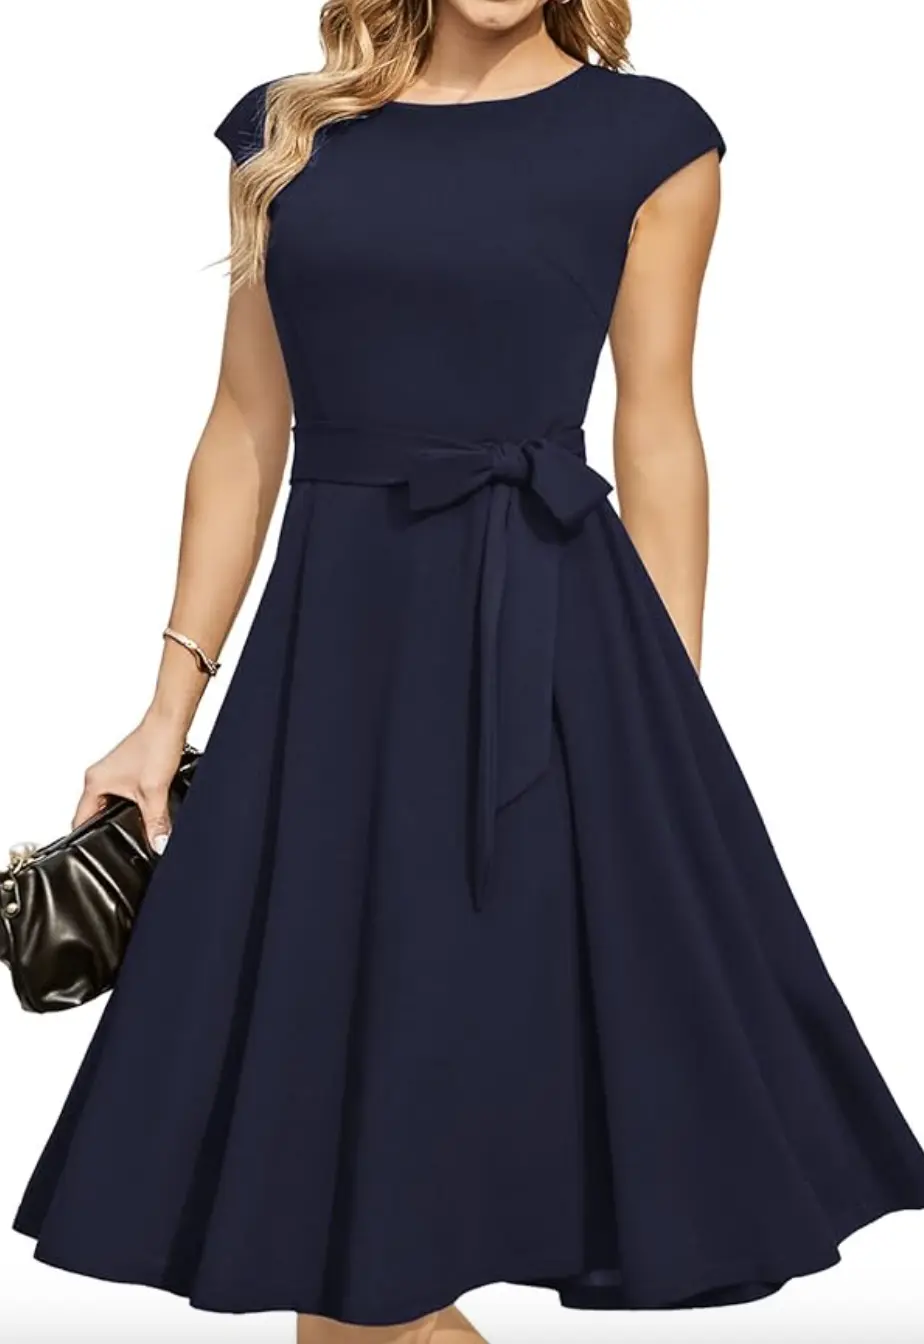 Cocktail Dress For Formal Nights